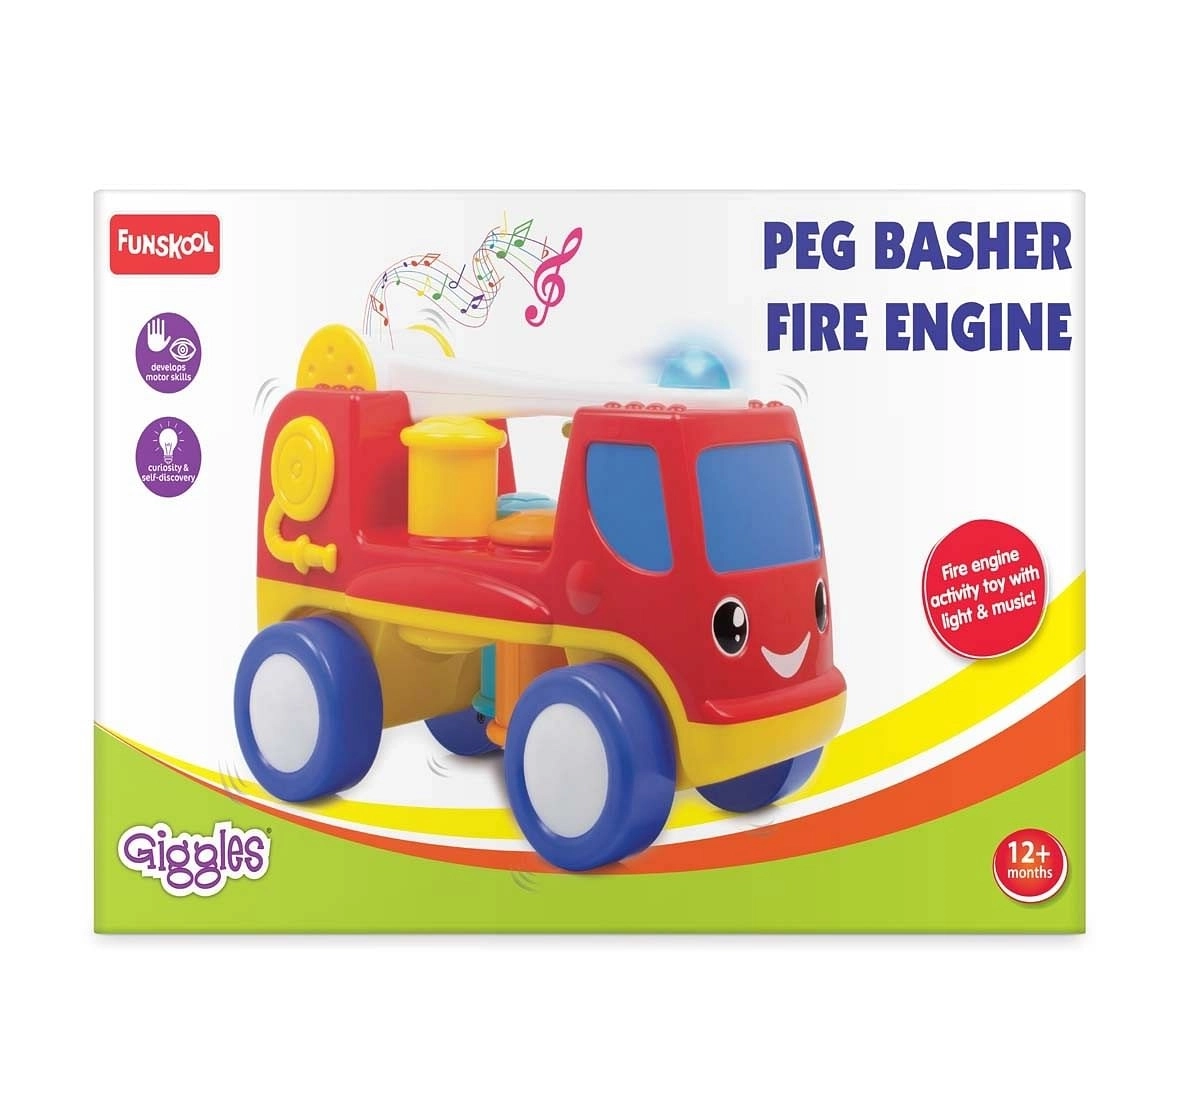 Giggles Musical Fire Engine Early Learner Toys for Kids Age 12M+